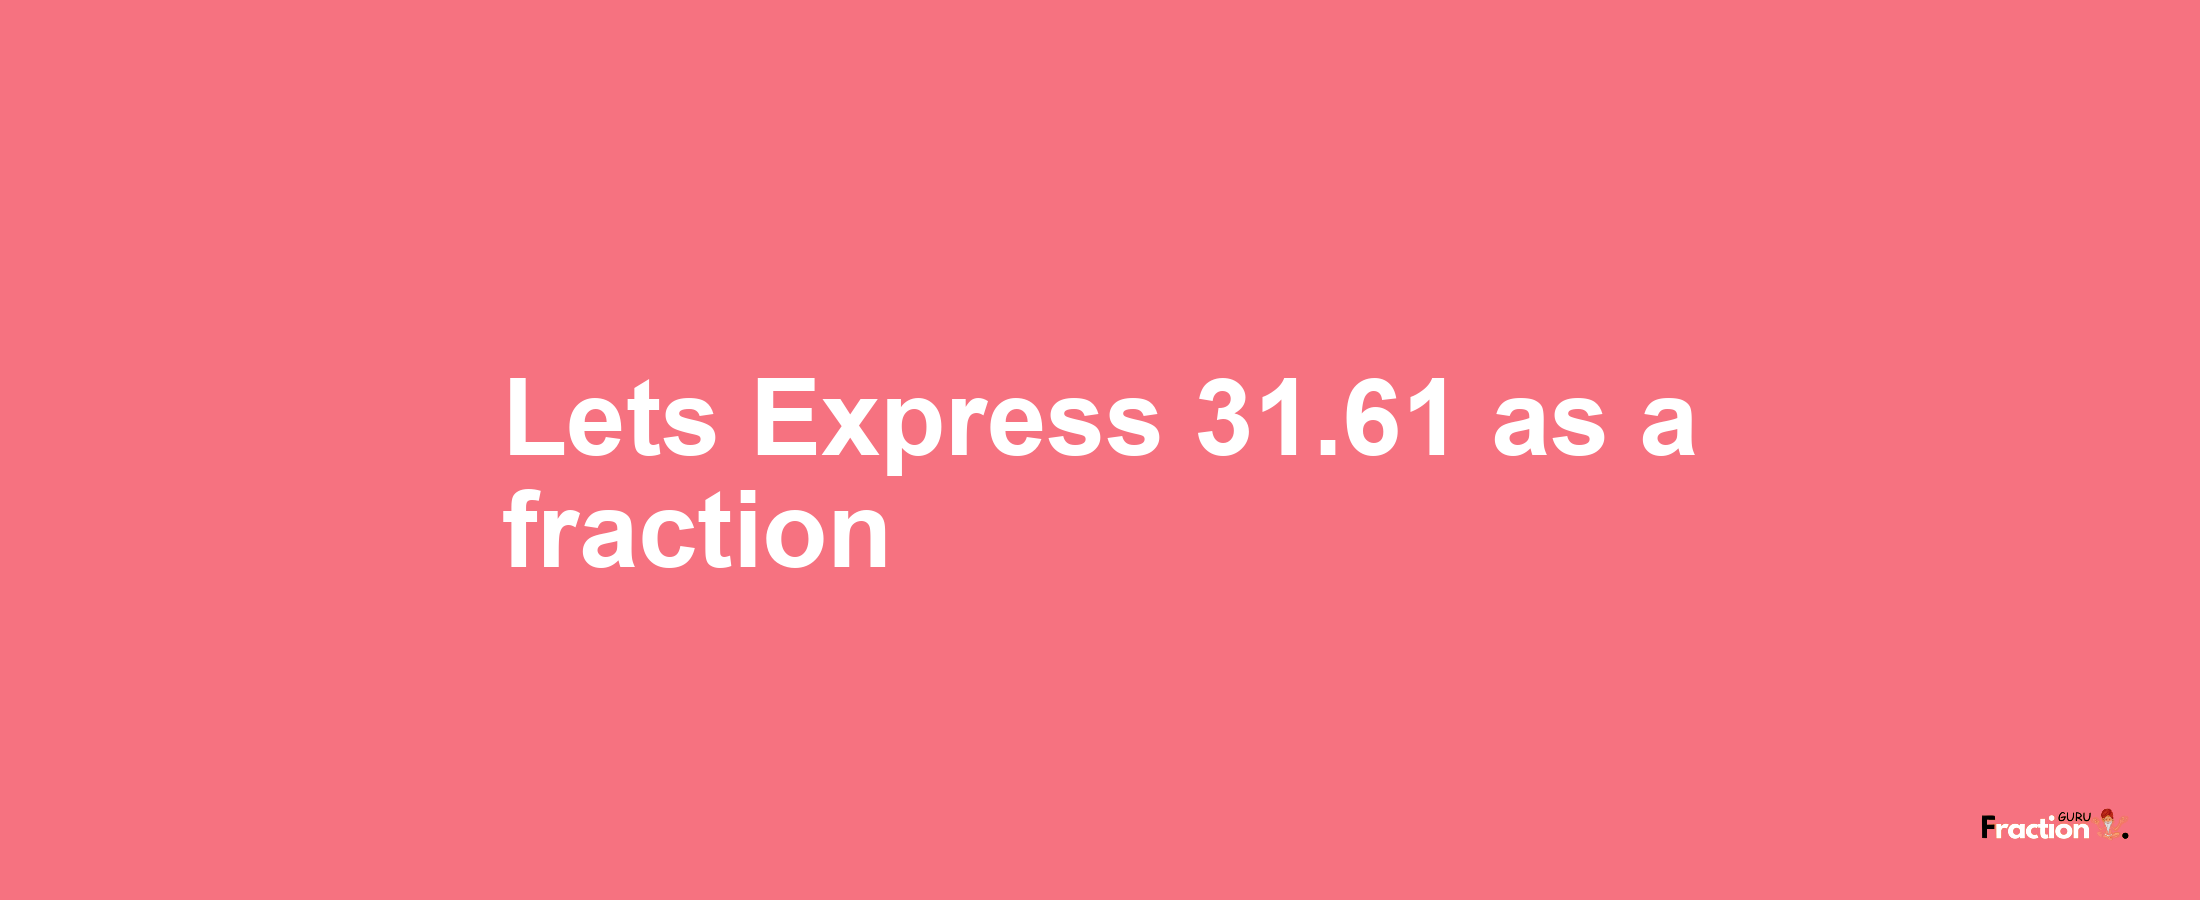 Lets Express 31.61 as afraction